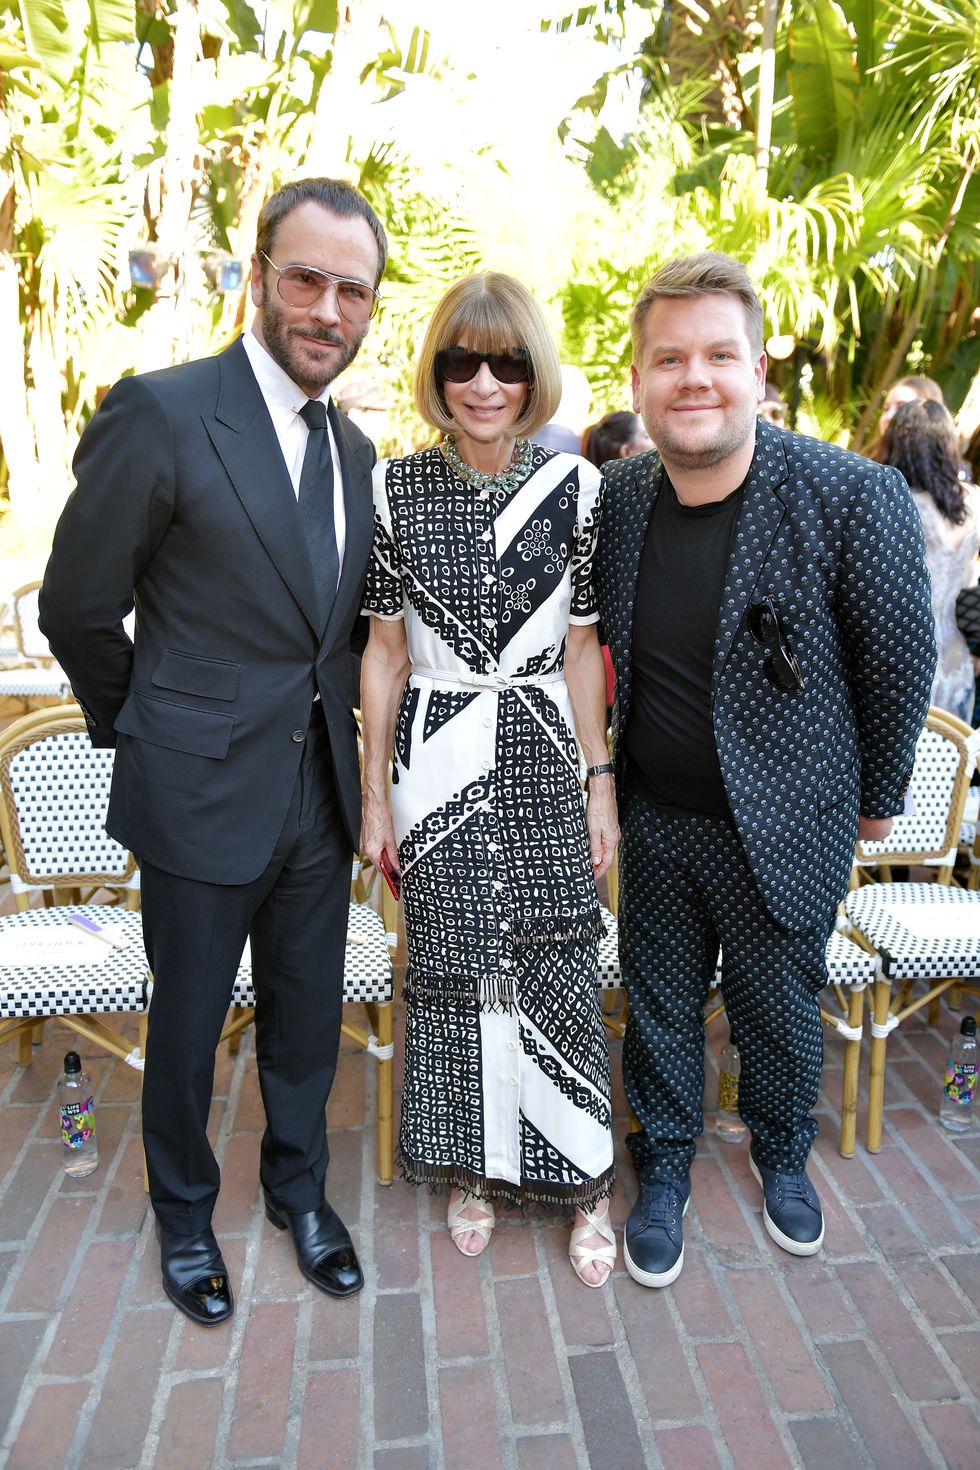 Tom Ford to Replace Diane von Furstenberg as Chairman of CFDA